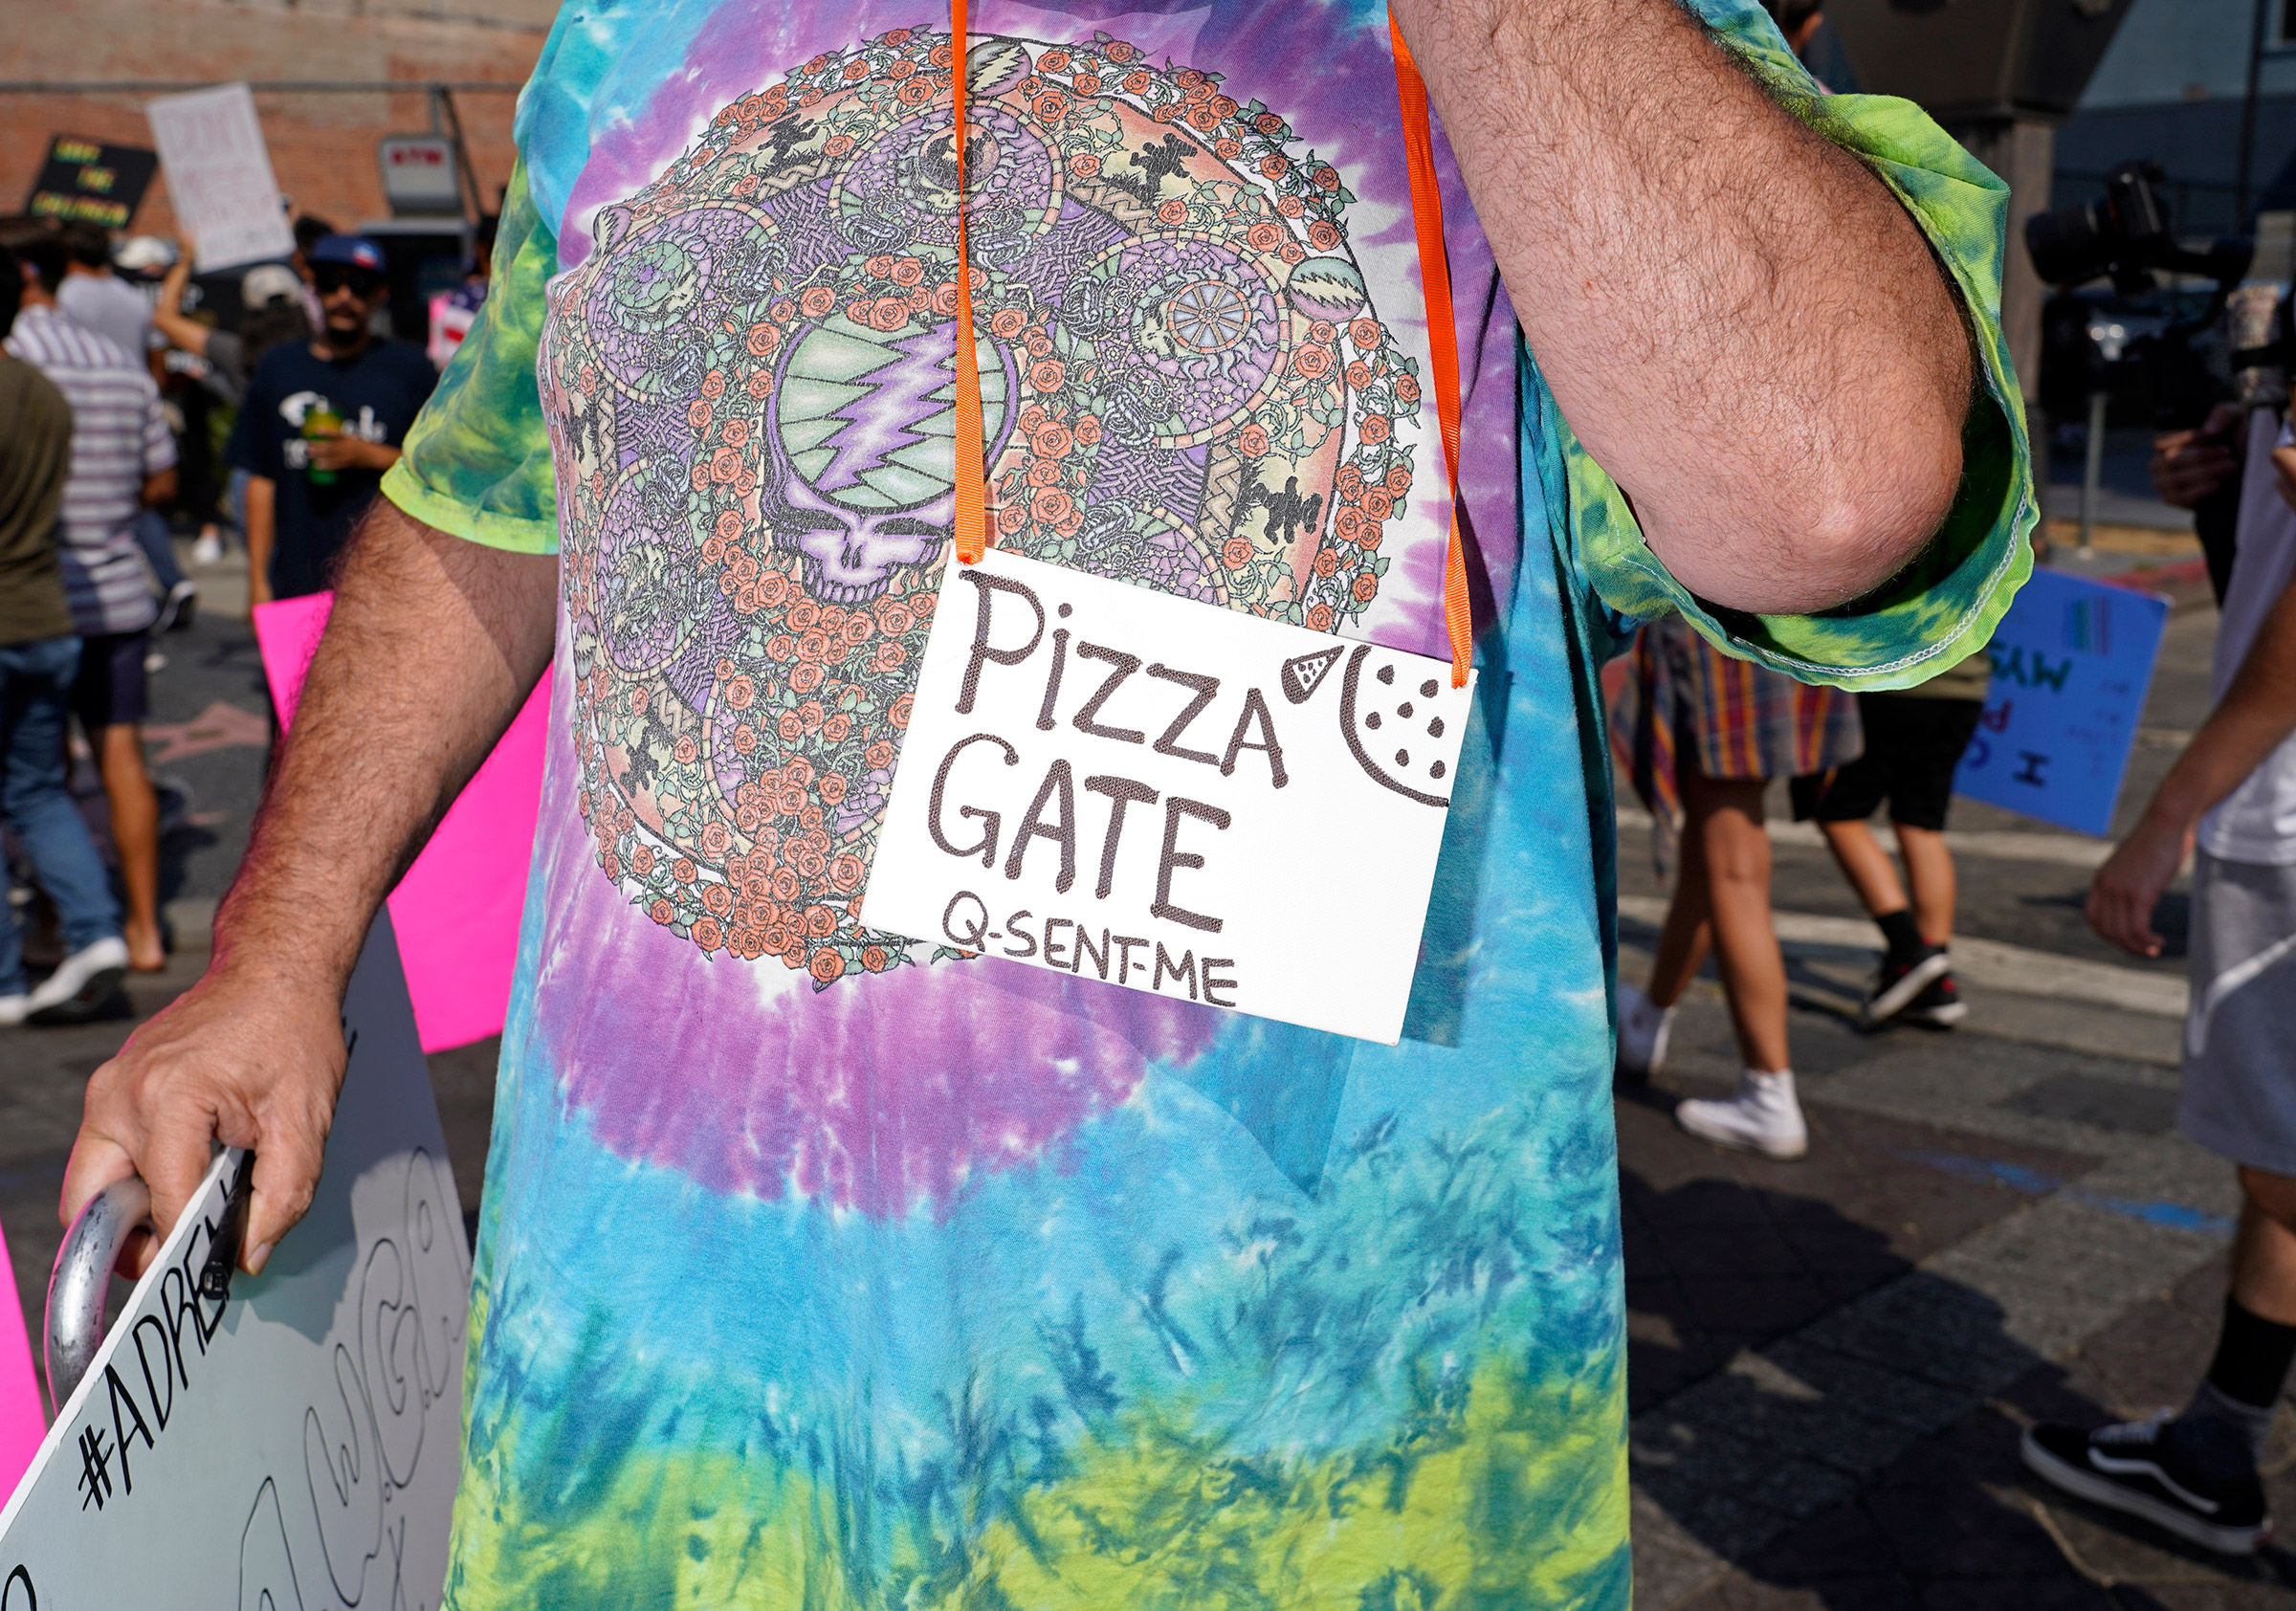 A protester with a Pizzagate and QAnon sign at a Save Our Children rally in Los Angeles, Aug. 22, 2020.